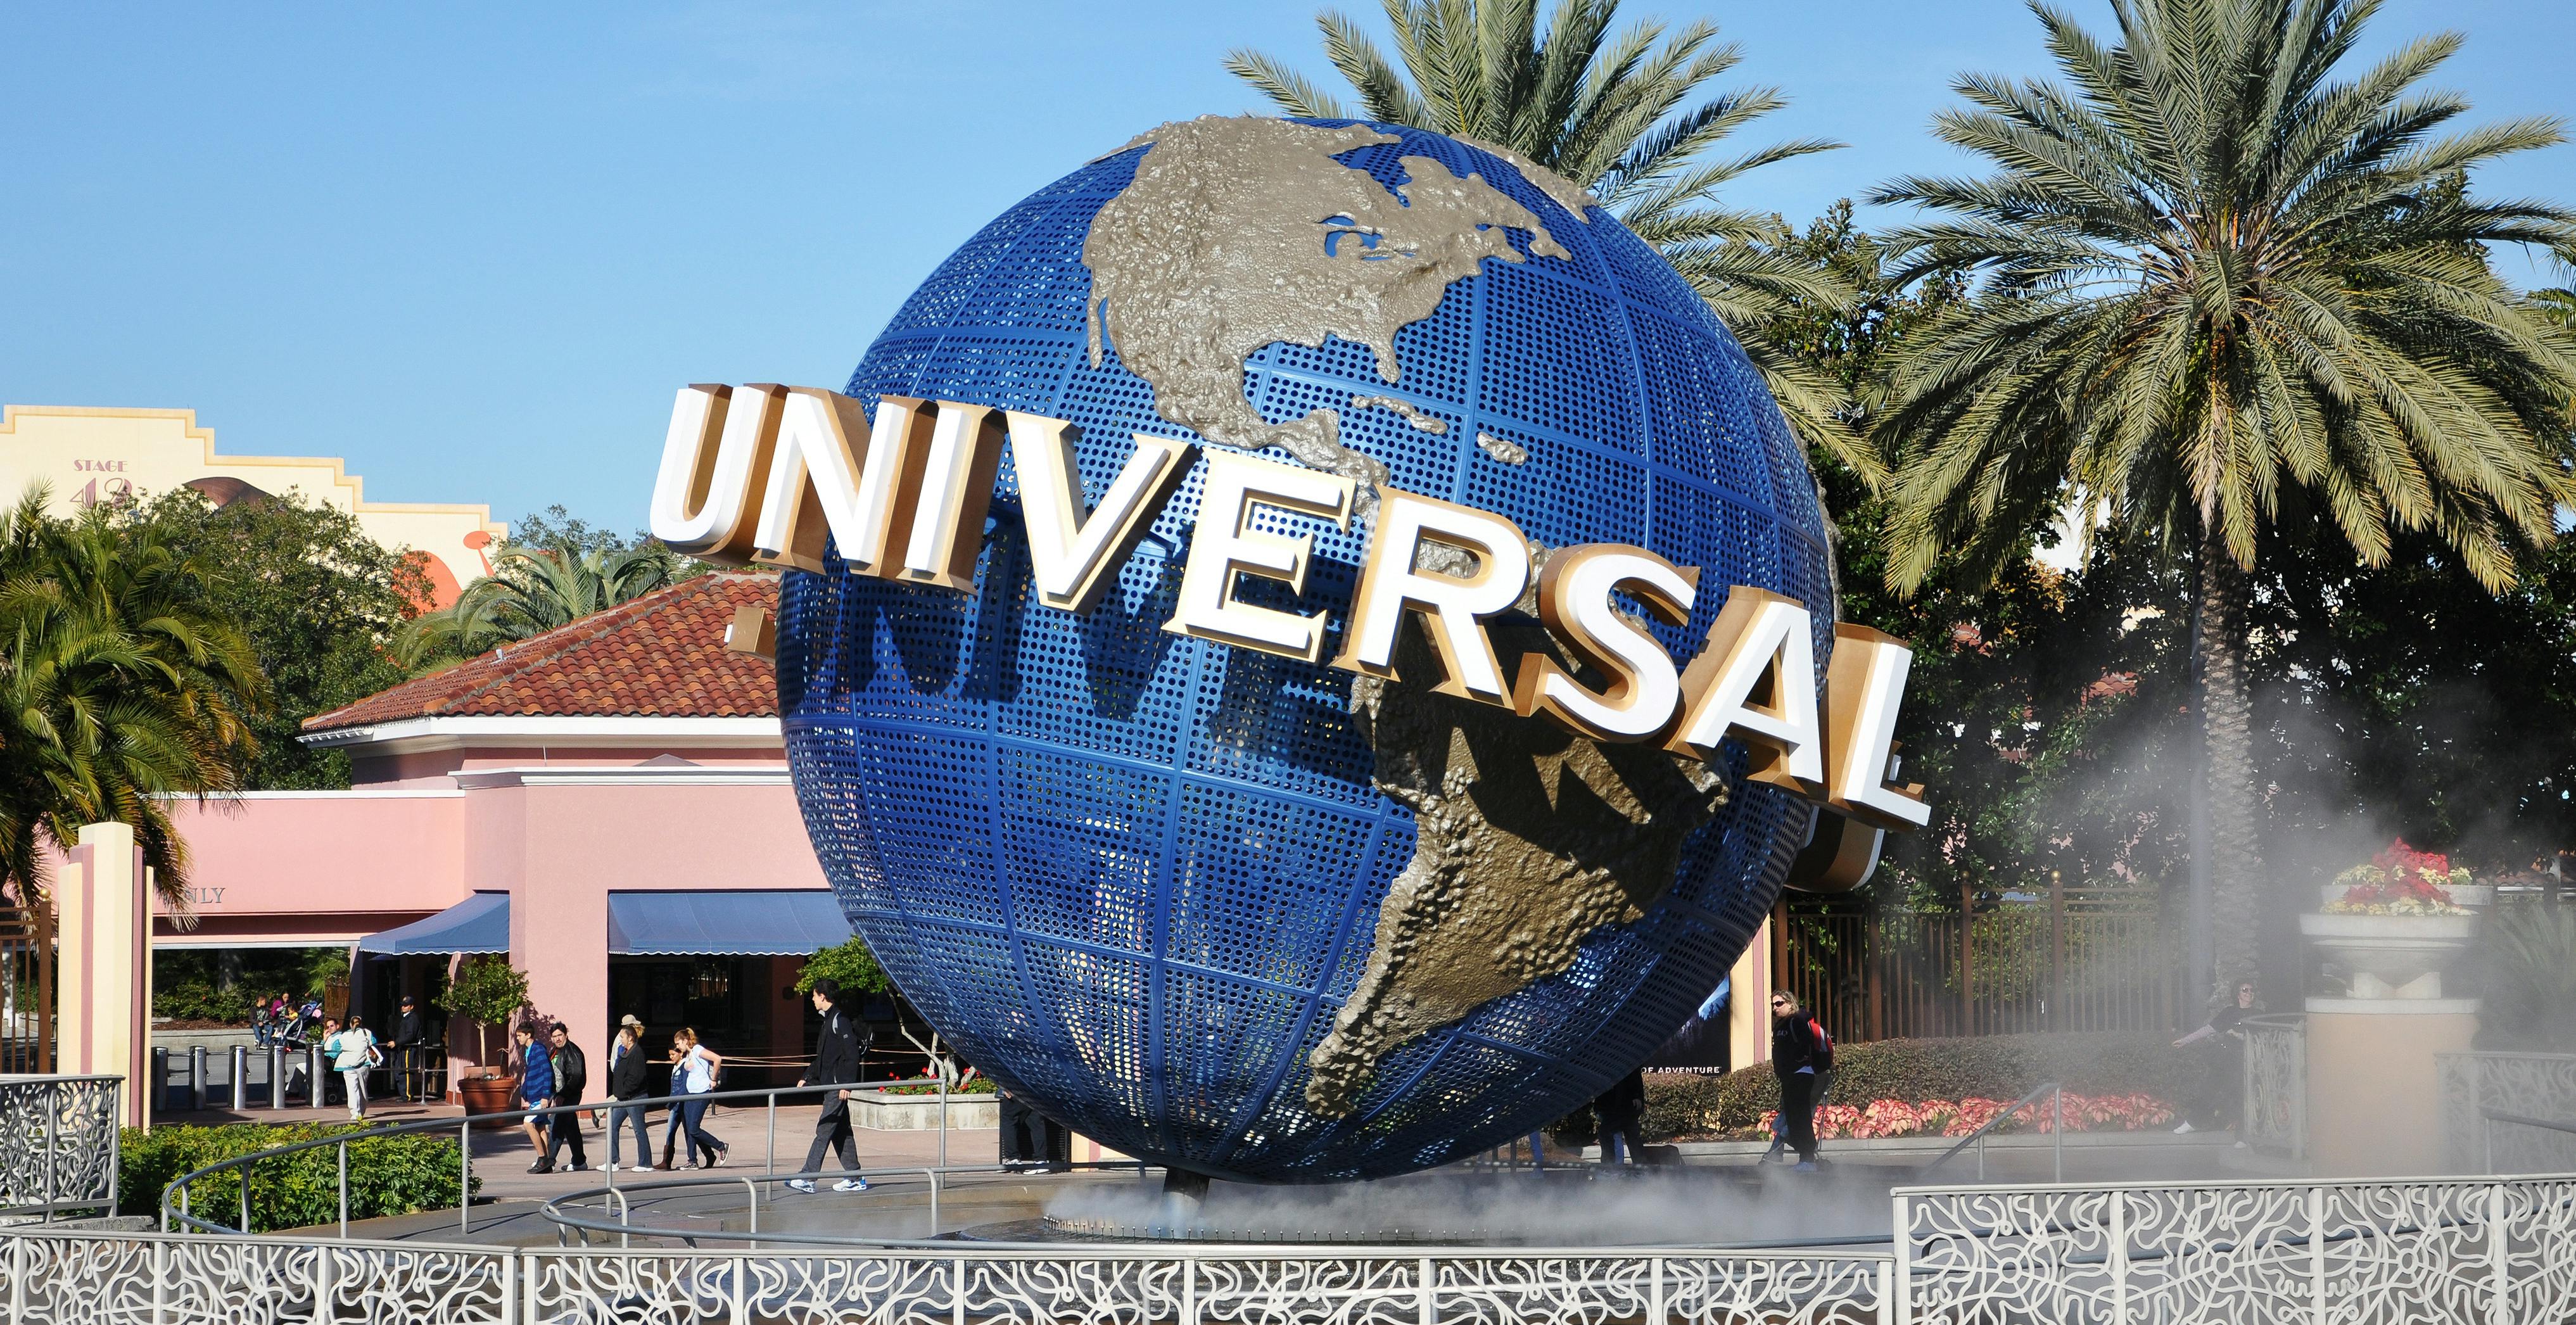 How to Get Cheap Universal Tickets - The Park Prodigy